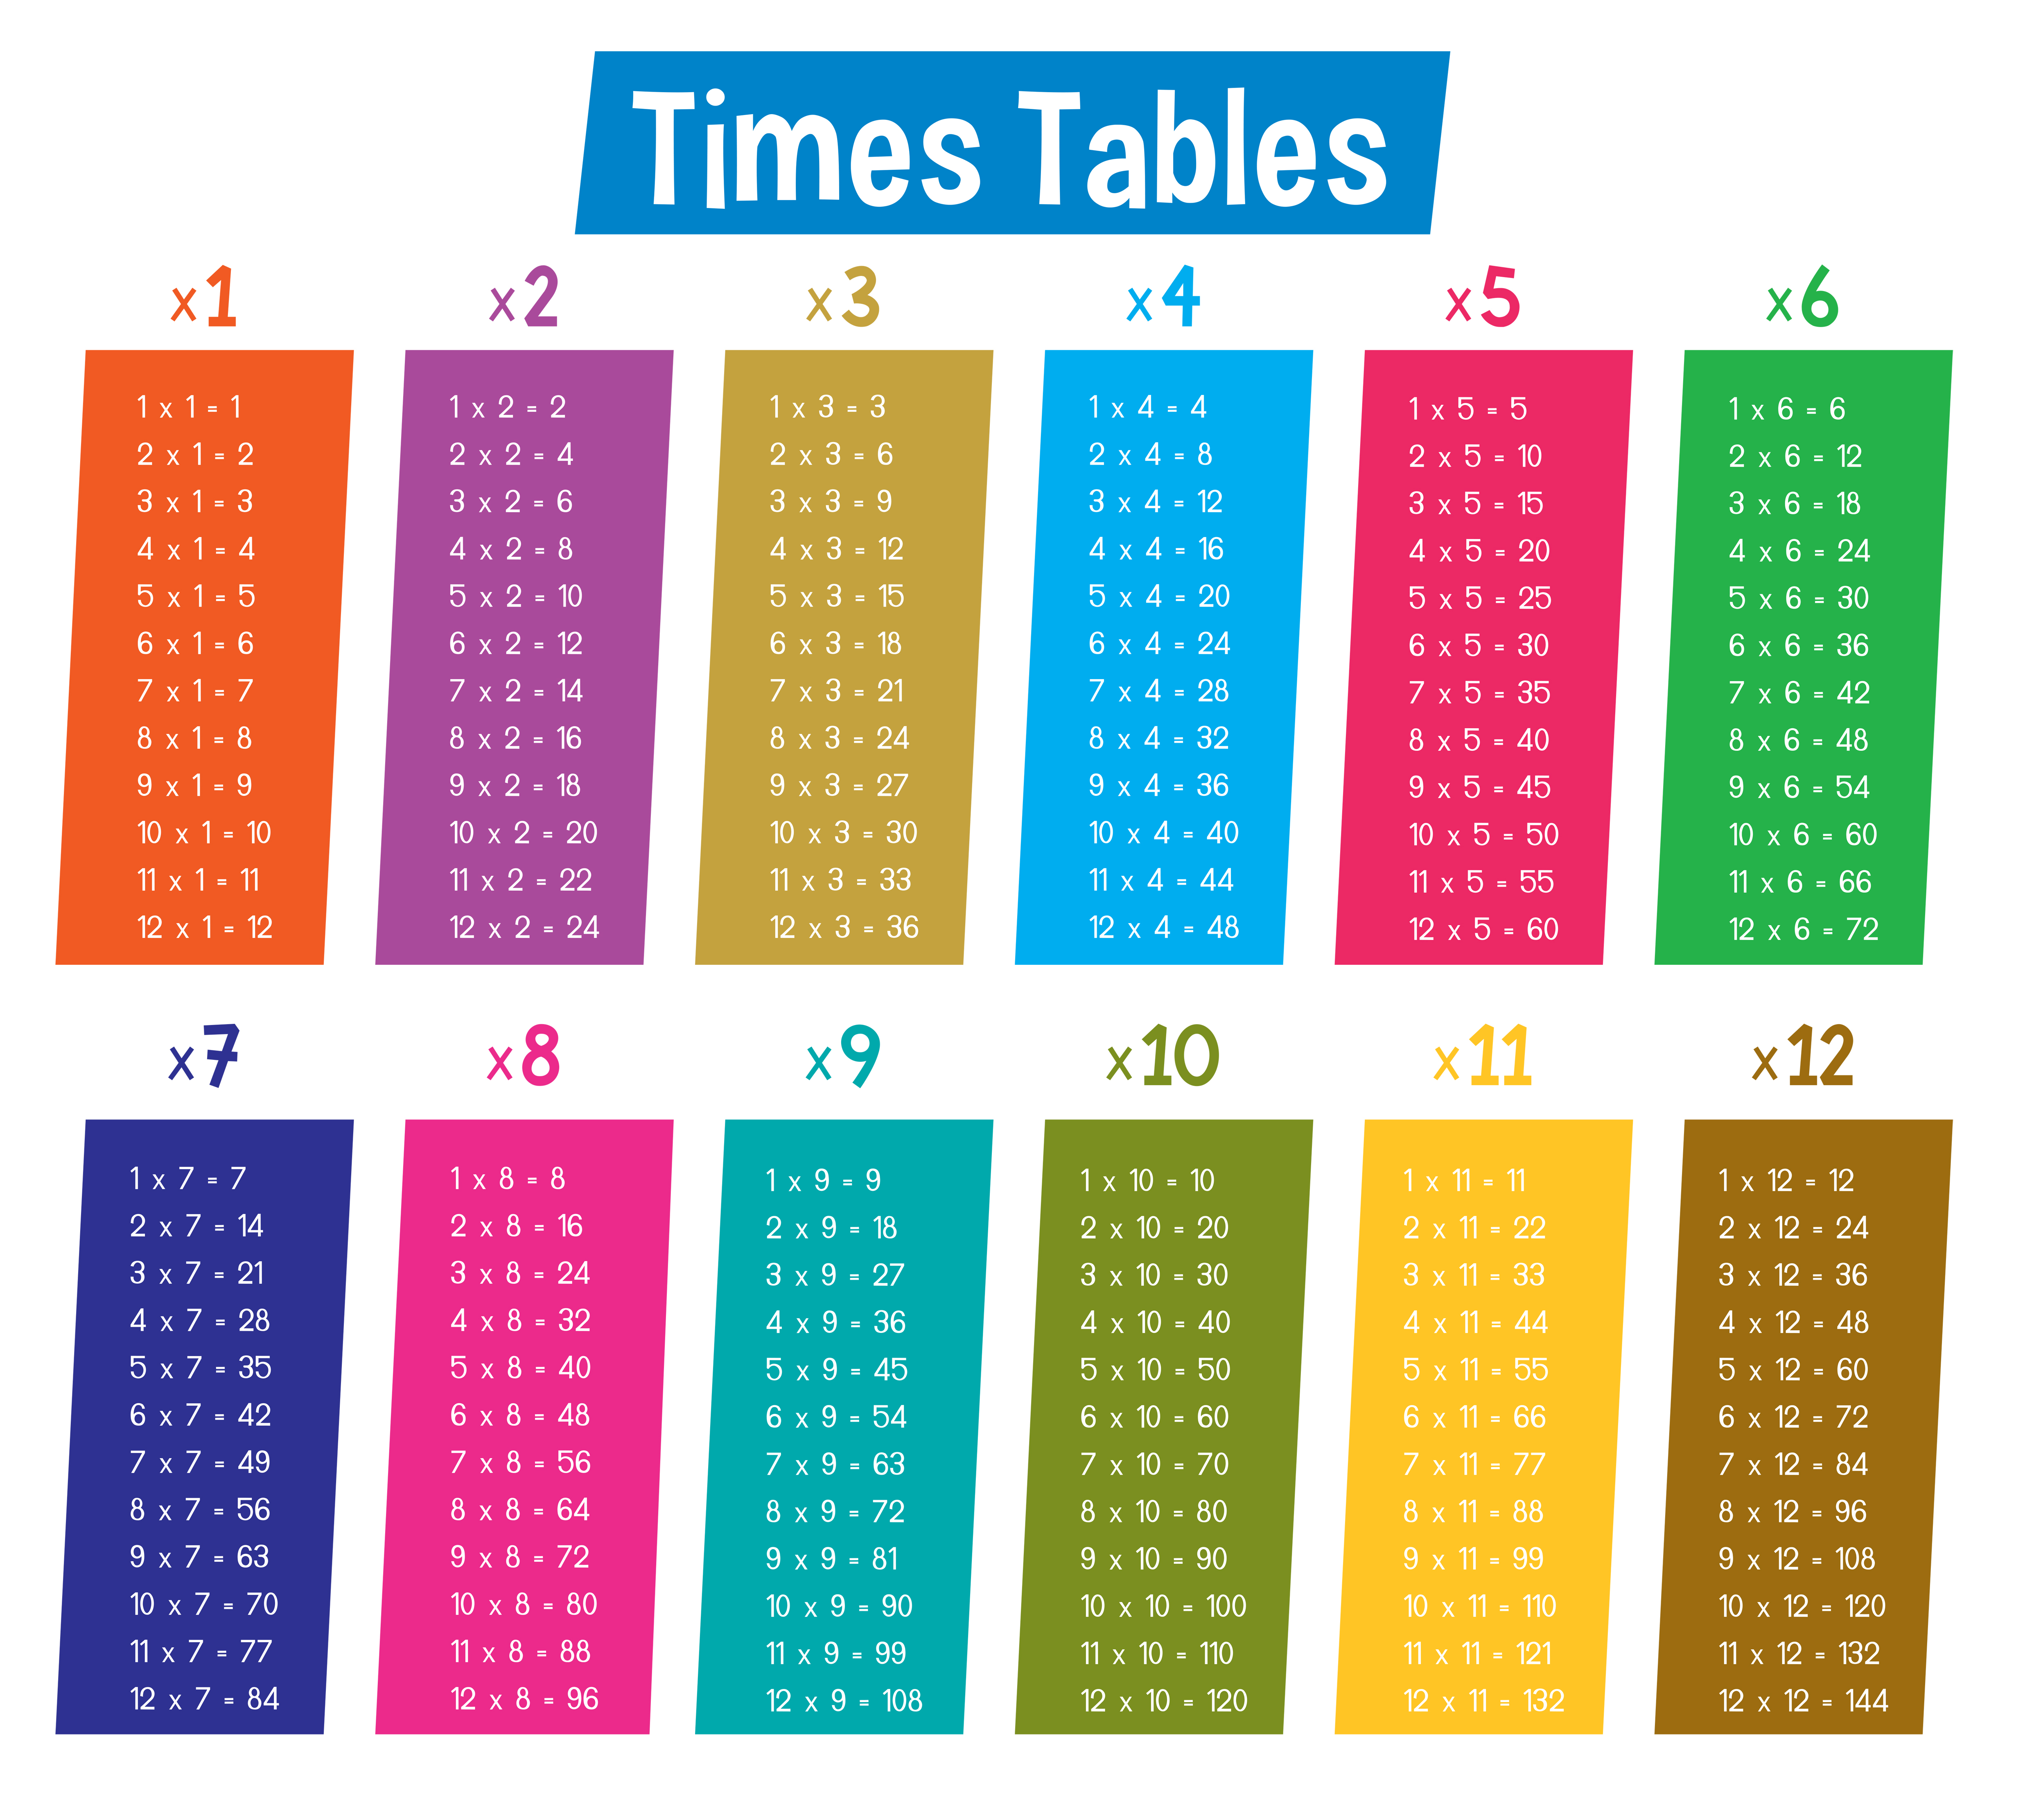 Colourful Math Times Tables - Download Free Vectors ...